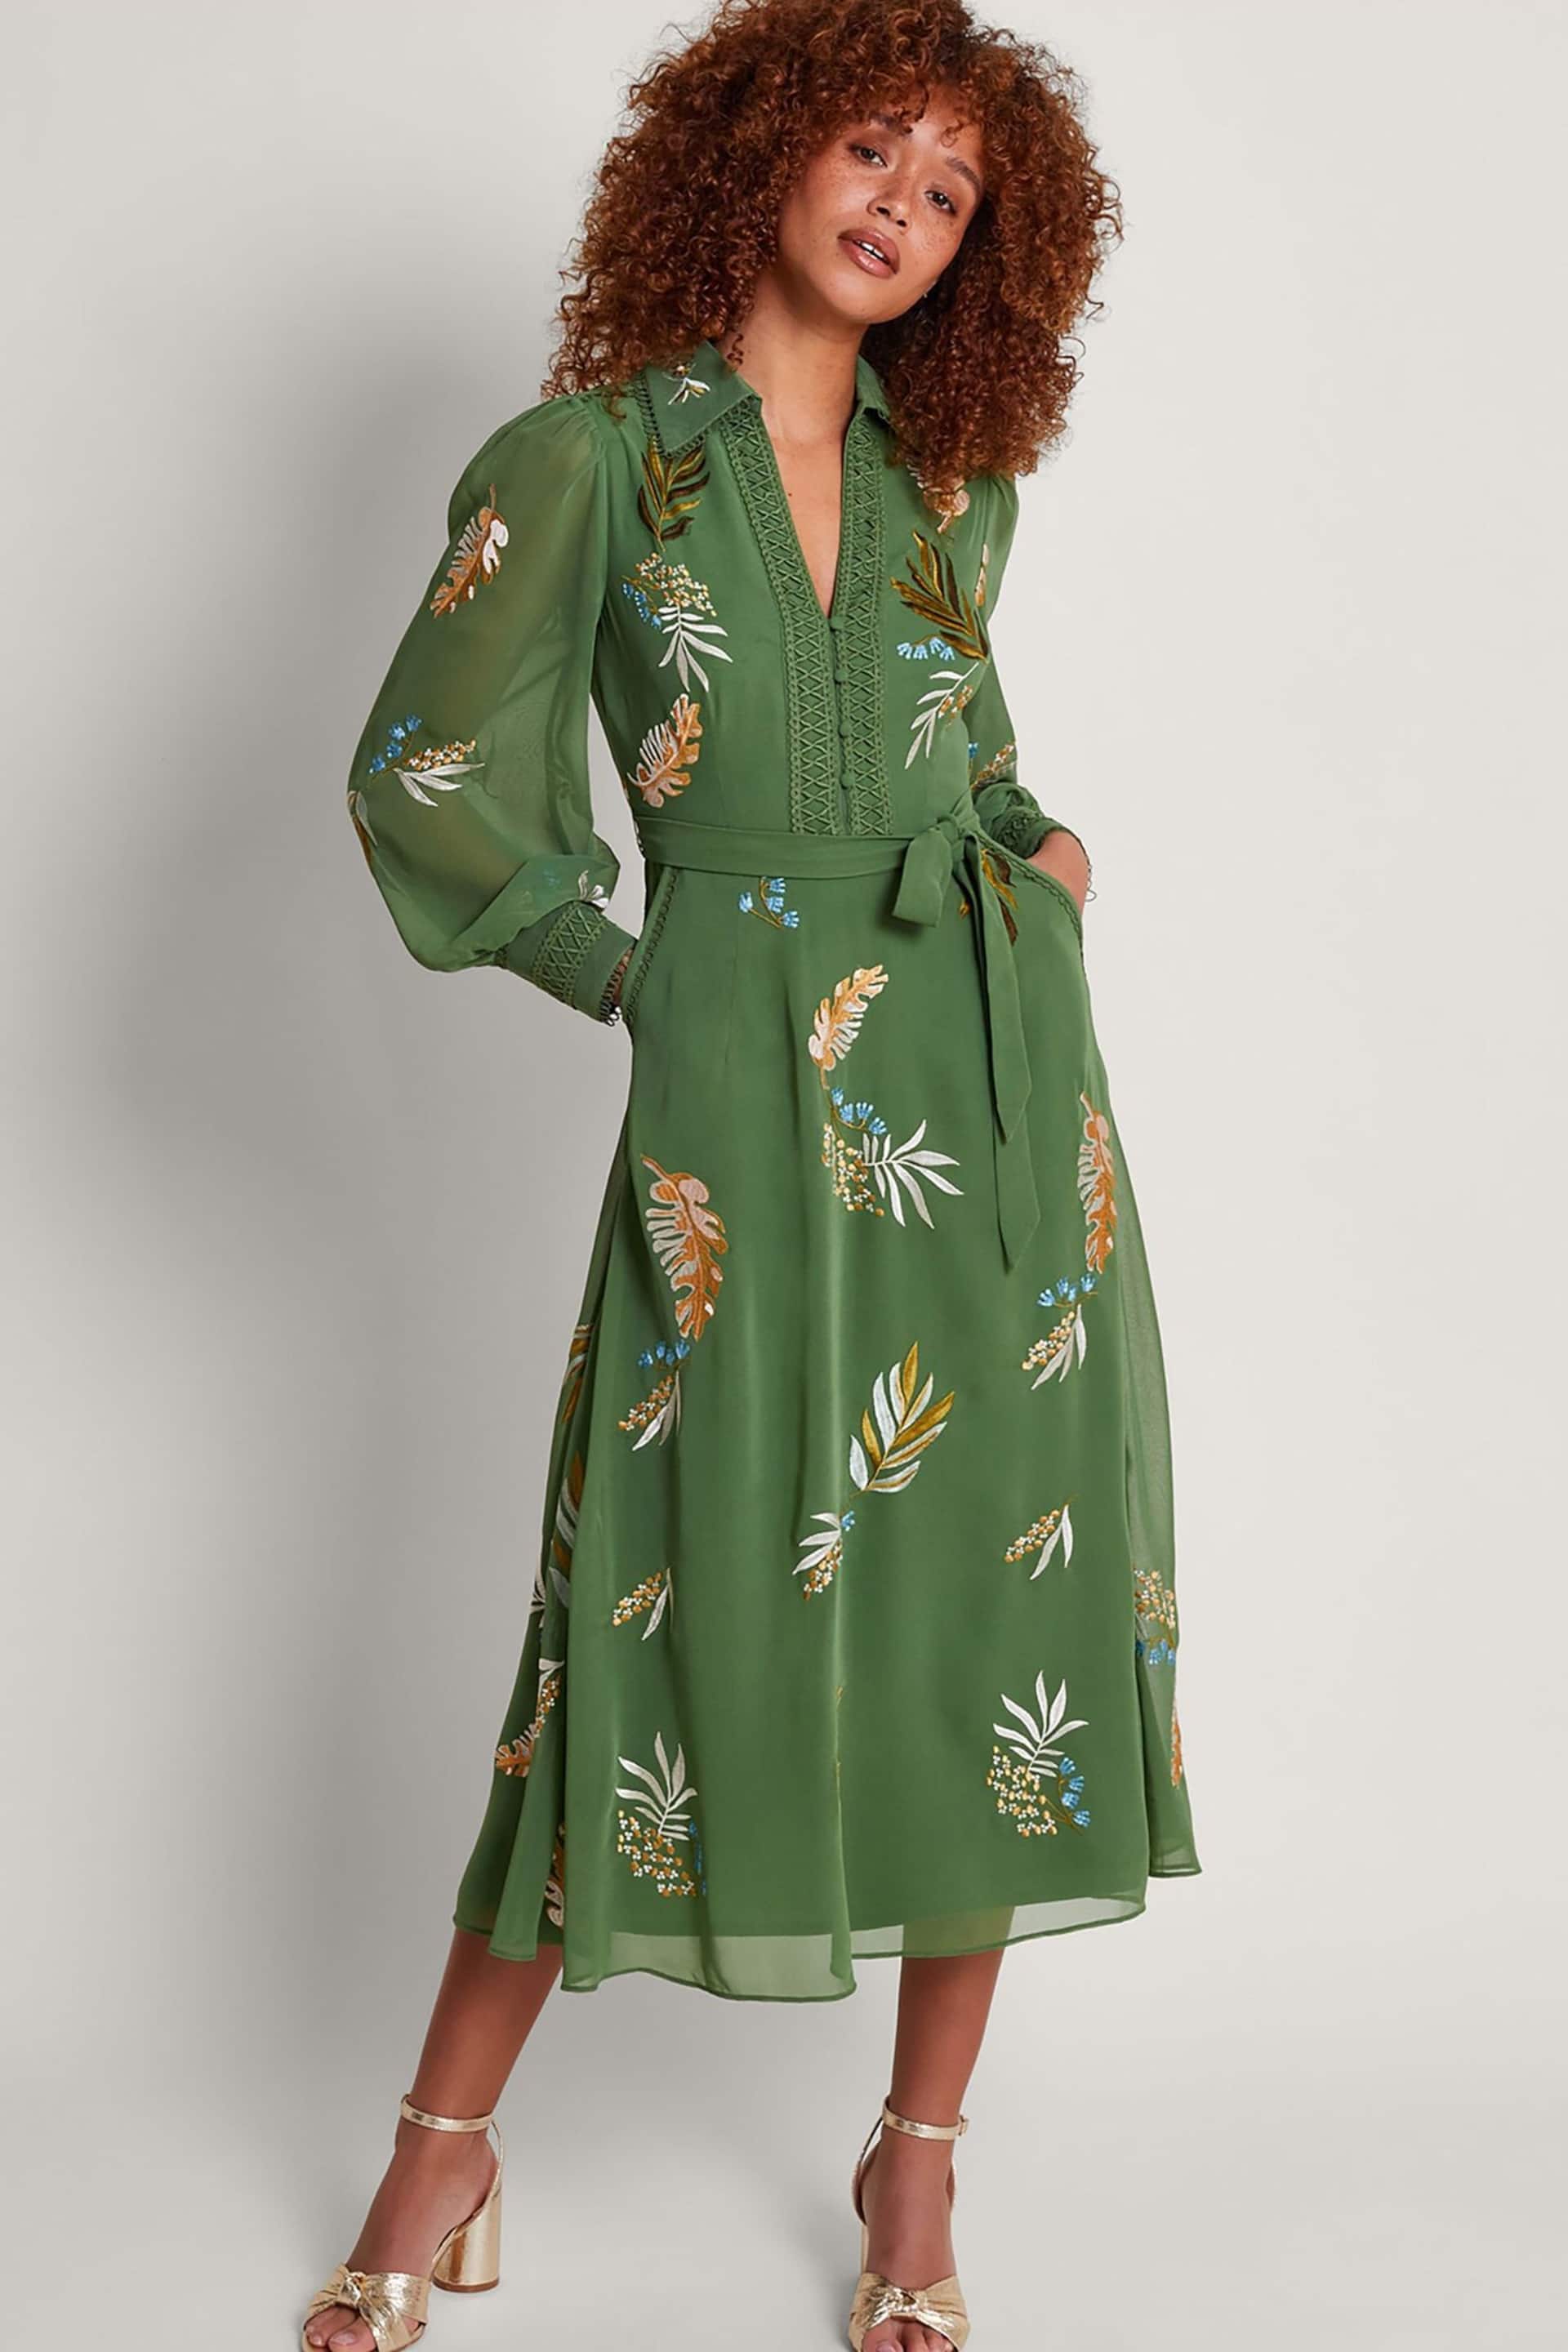 Monsoon Green Erin Embroidered Shirt Dress - Image 1 of 5